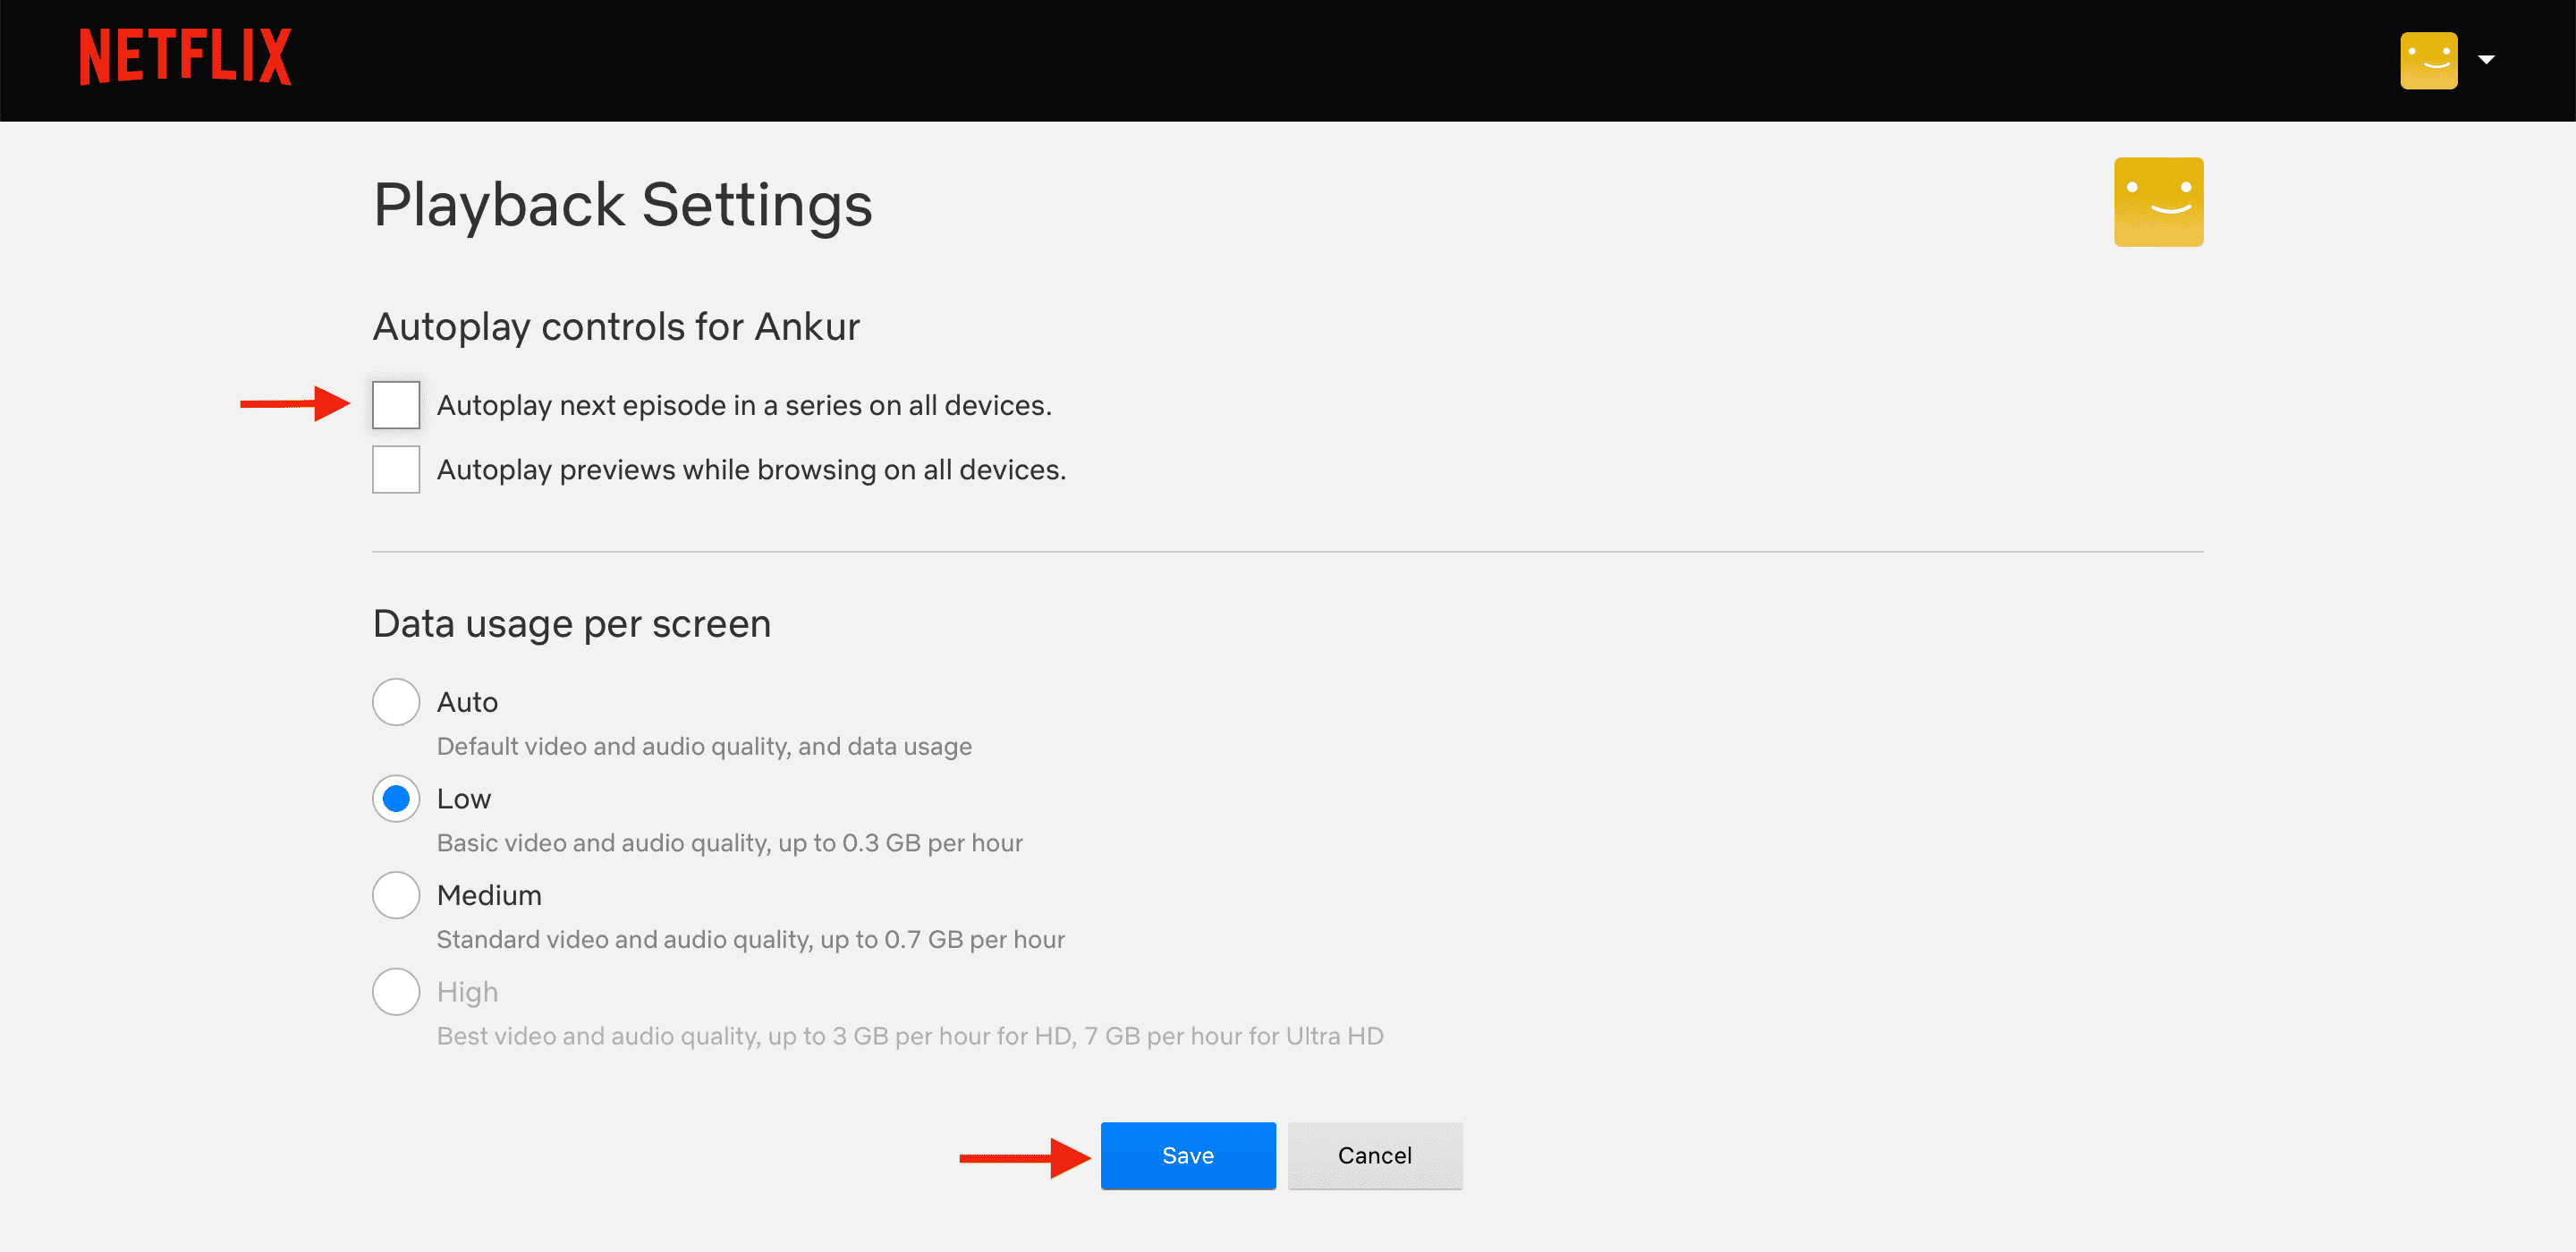 Turn off Autoplay next episode in a series on all devices in Netflix settings on web